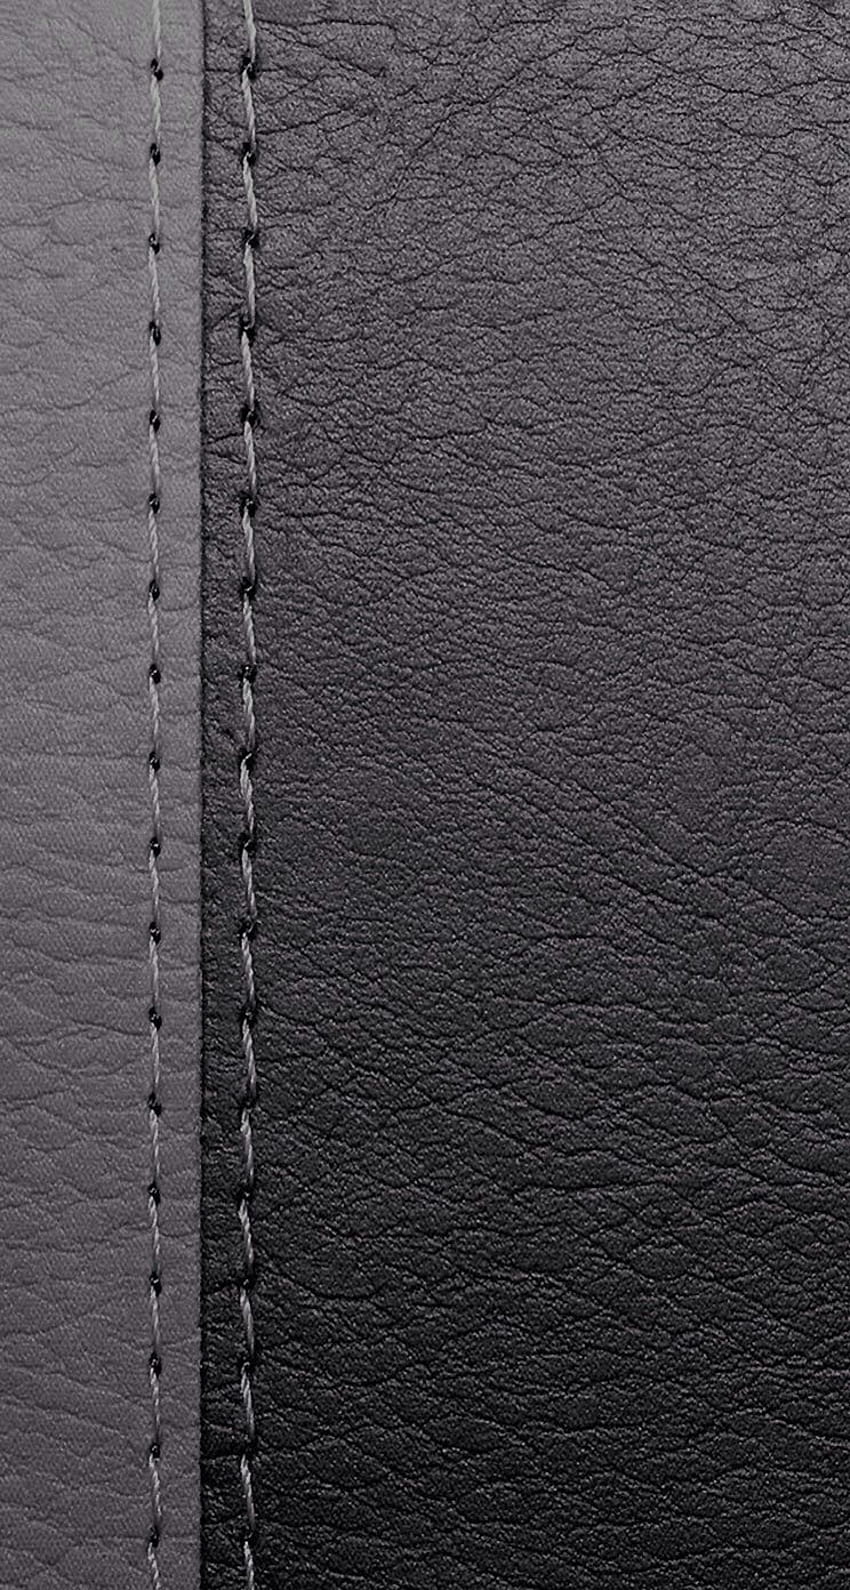 Leather iPhone, color leather HD phone wallpaper